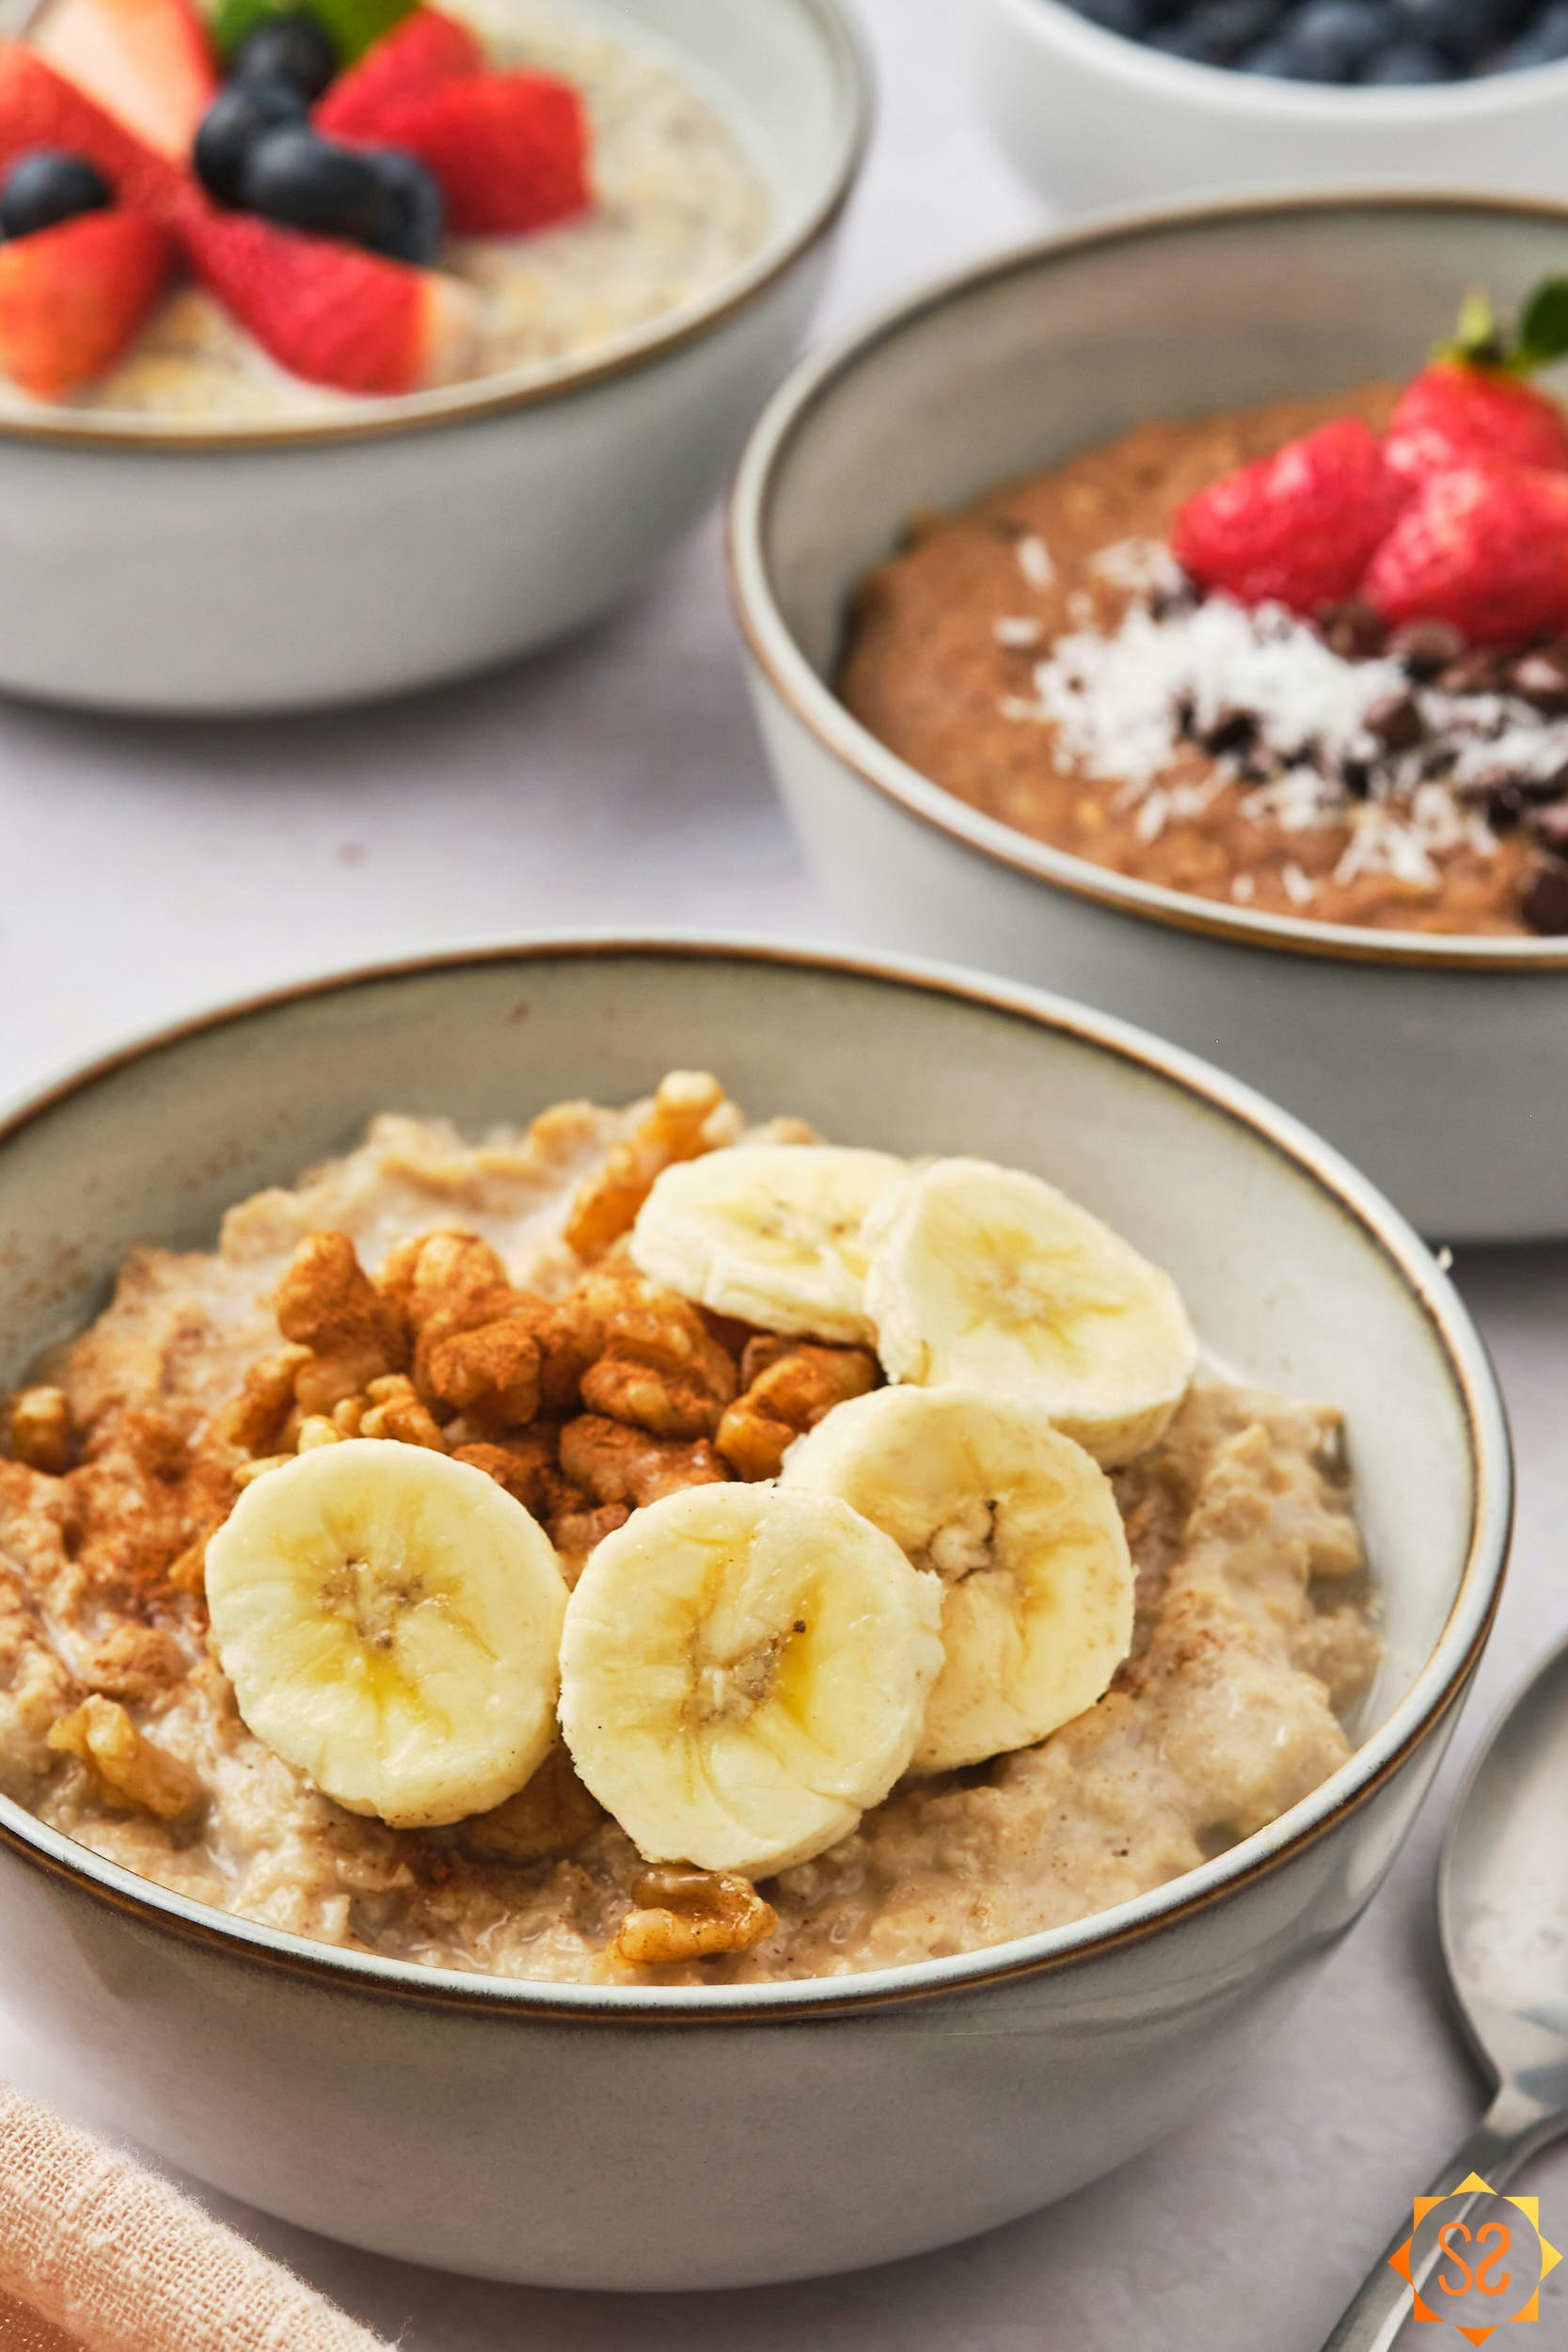 A 45 degree view of three bowls of protein oatmeal, the one in front is topped with banana slices and walnuts.